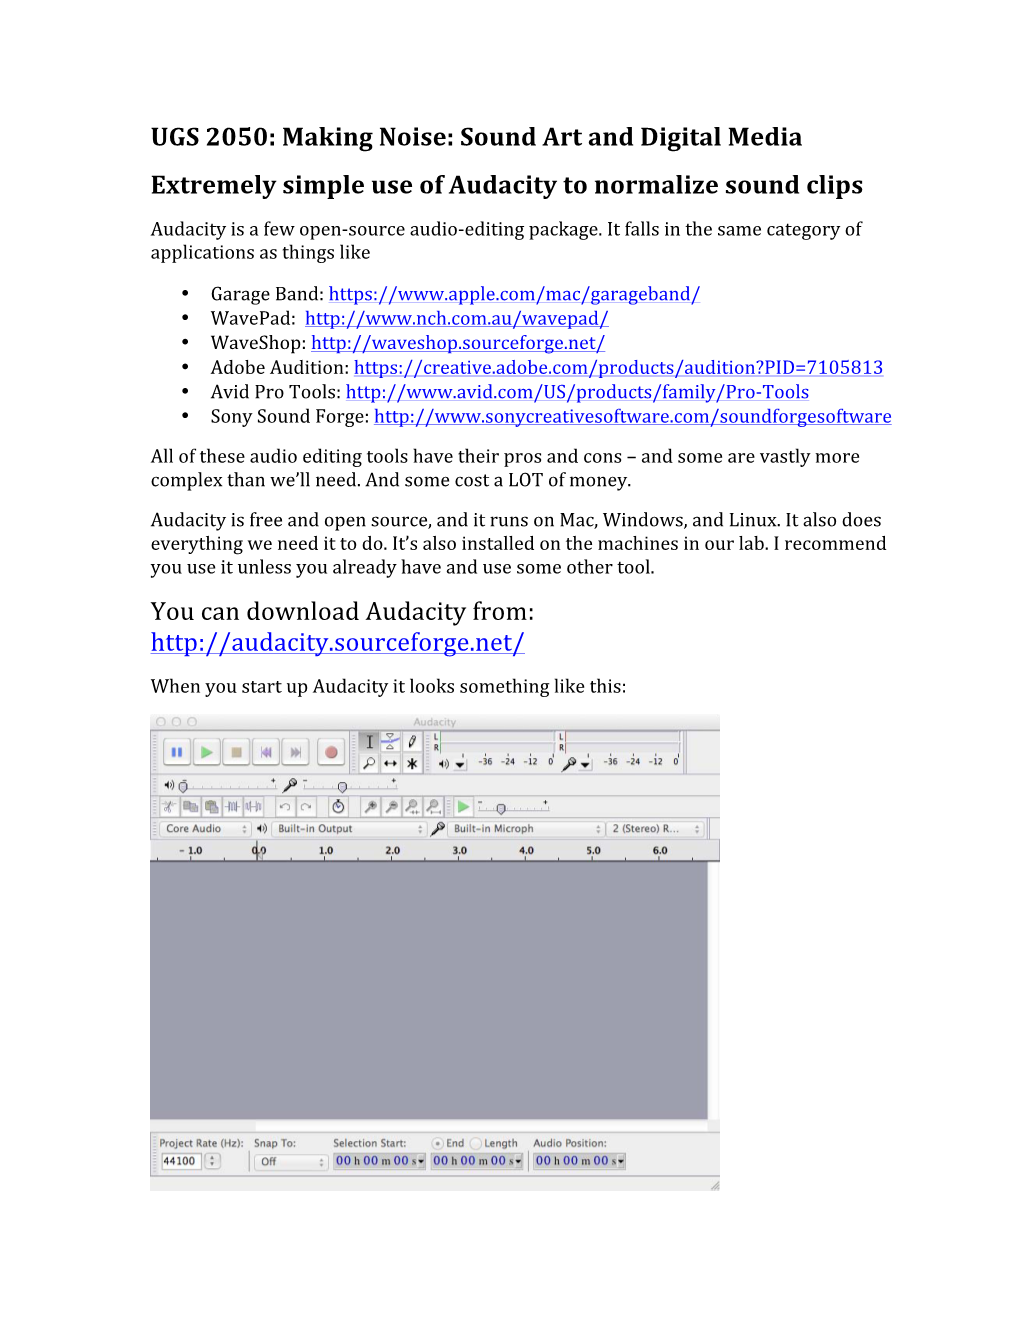 Making Noise: Sound Art and Digital Media Extremely Simple Use of Audacity to Normalize Sound Clips